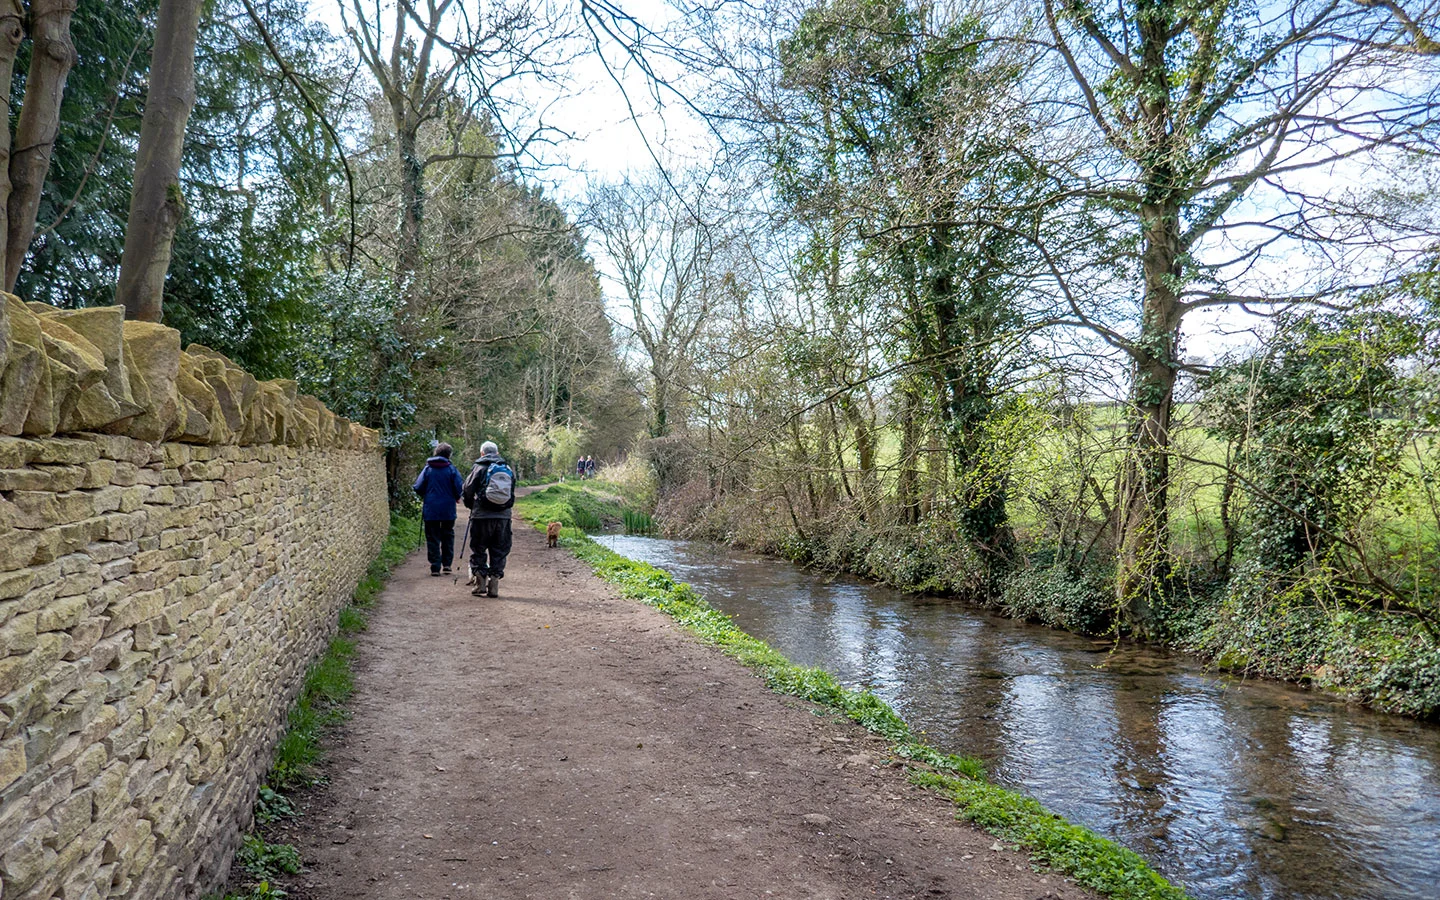 Path along the River Windrush towards Bourton-on-the-Water